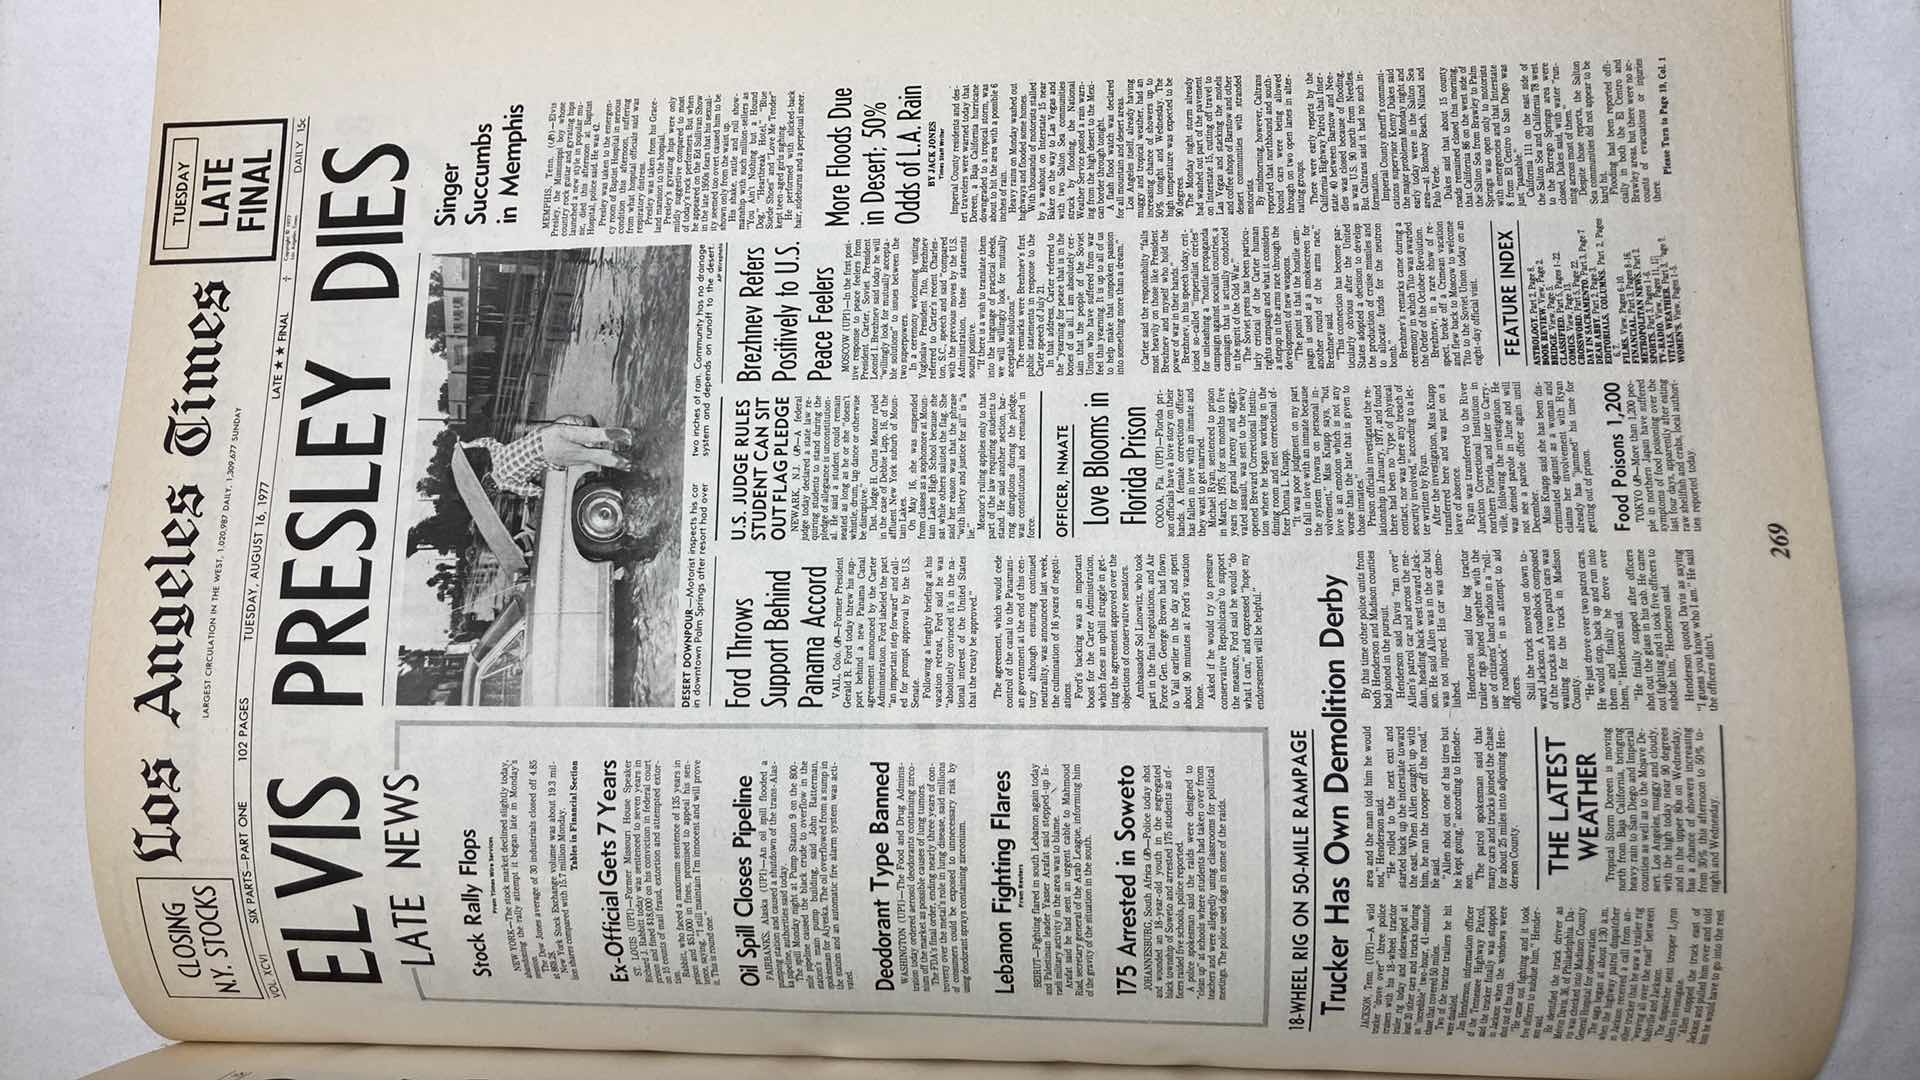 Photo 4 of LOS ANGELES TIMES FRONT PAGE COLLECTION OF HISTORICAL HEADLINES BOOKS 1881-1987 (2)